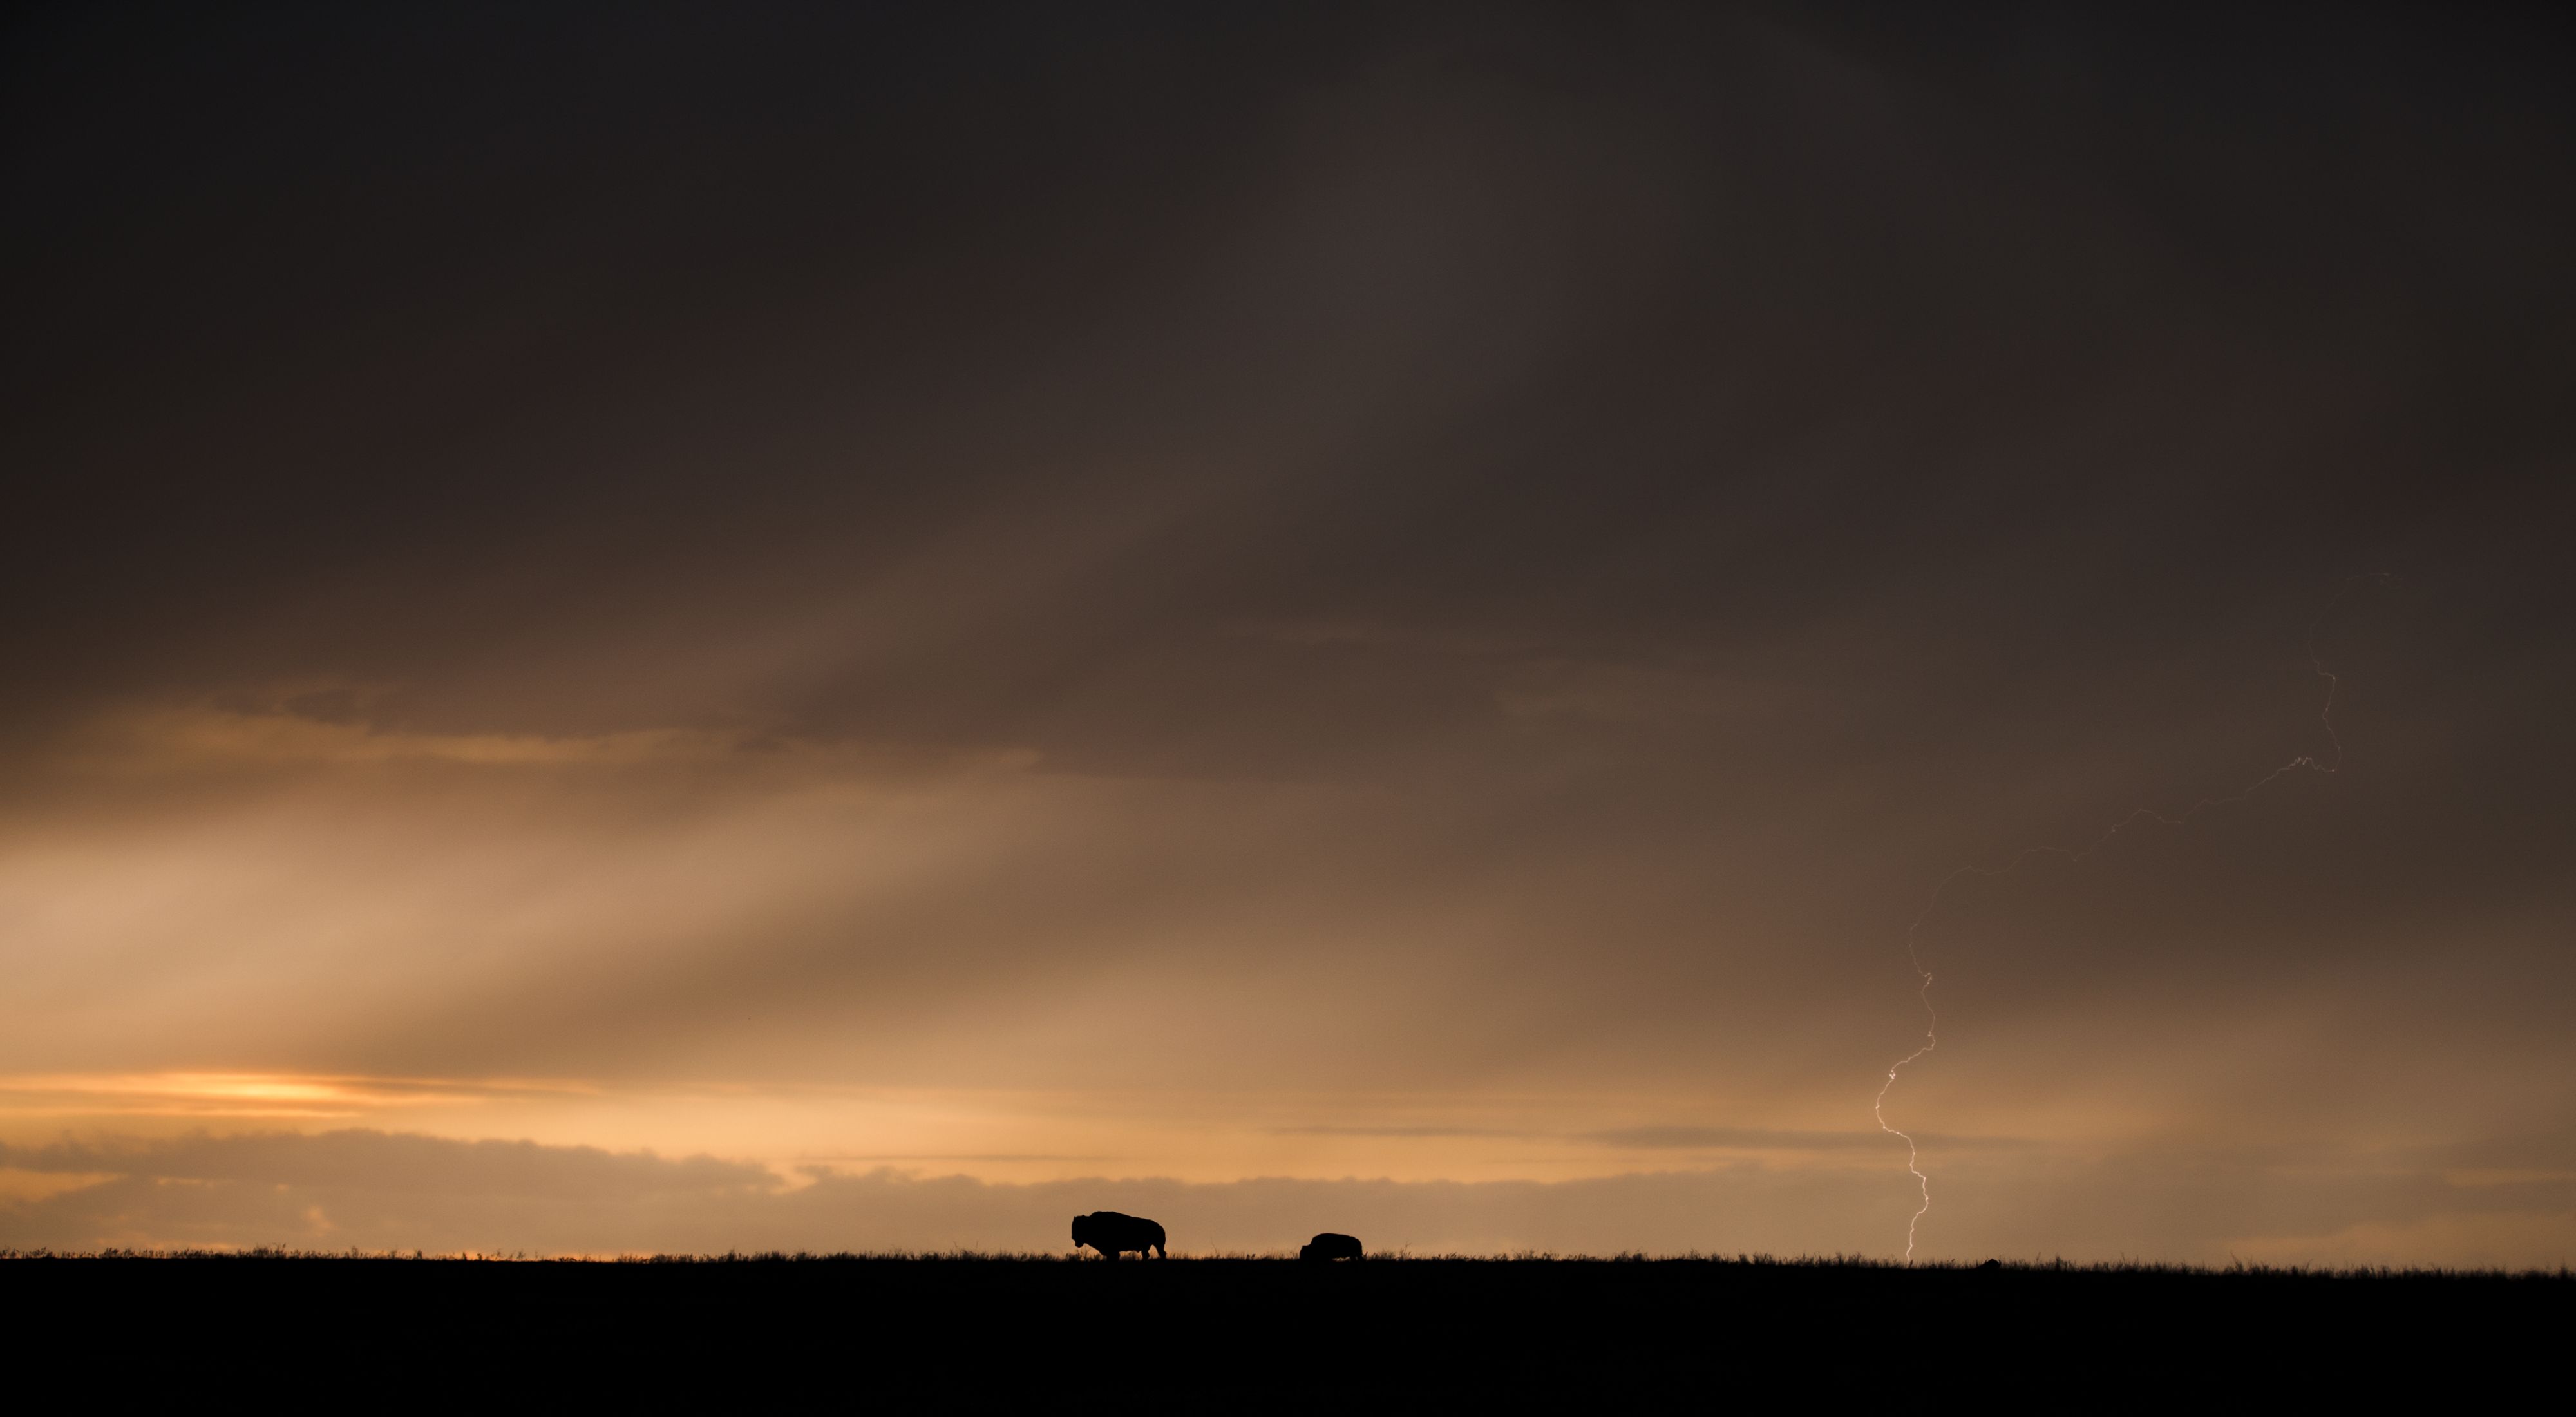 Bison in the distance silhouetted against a dark sky.